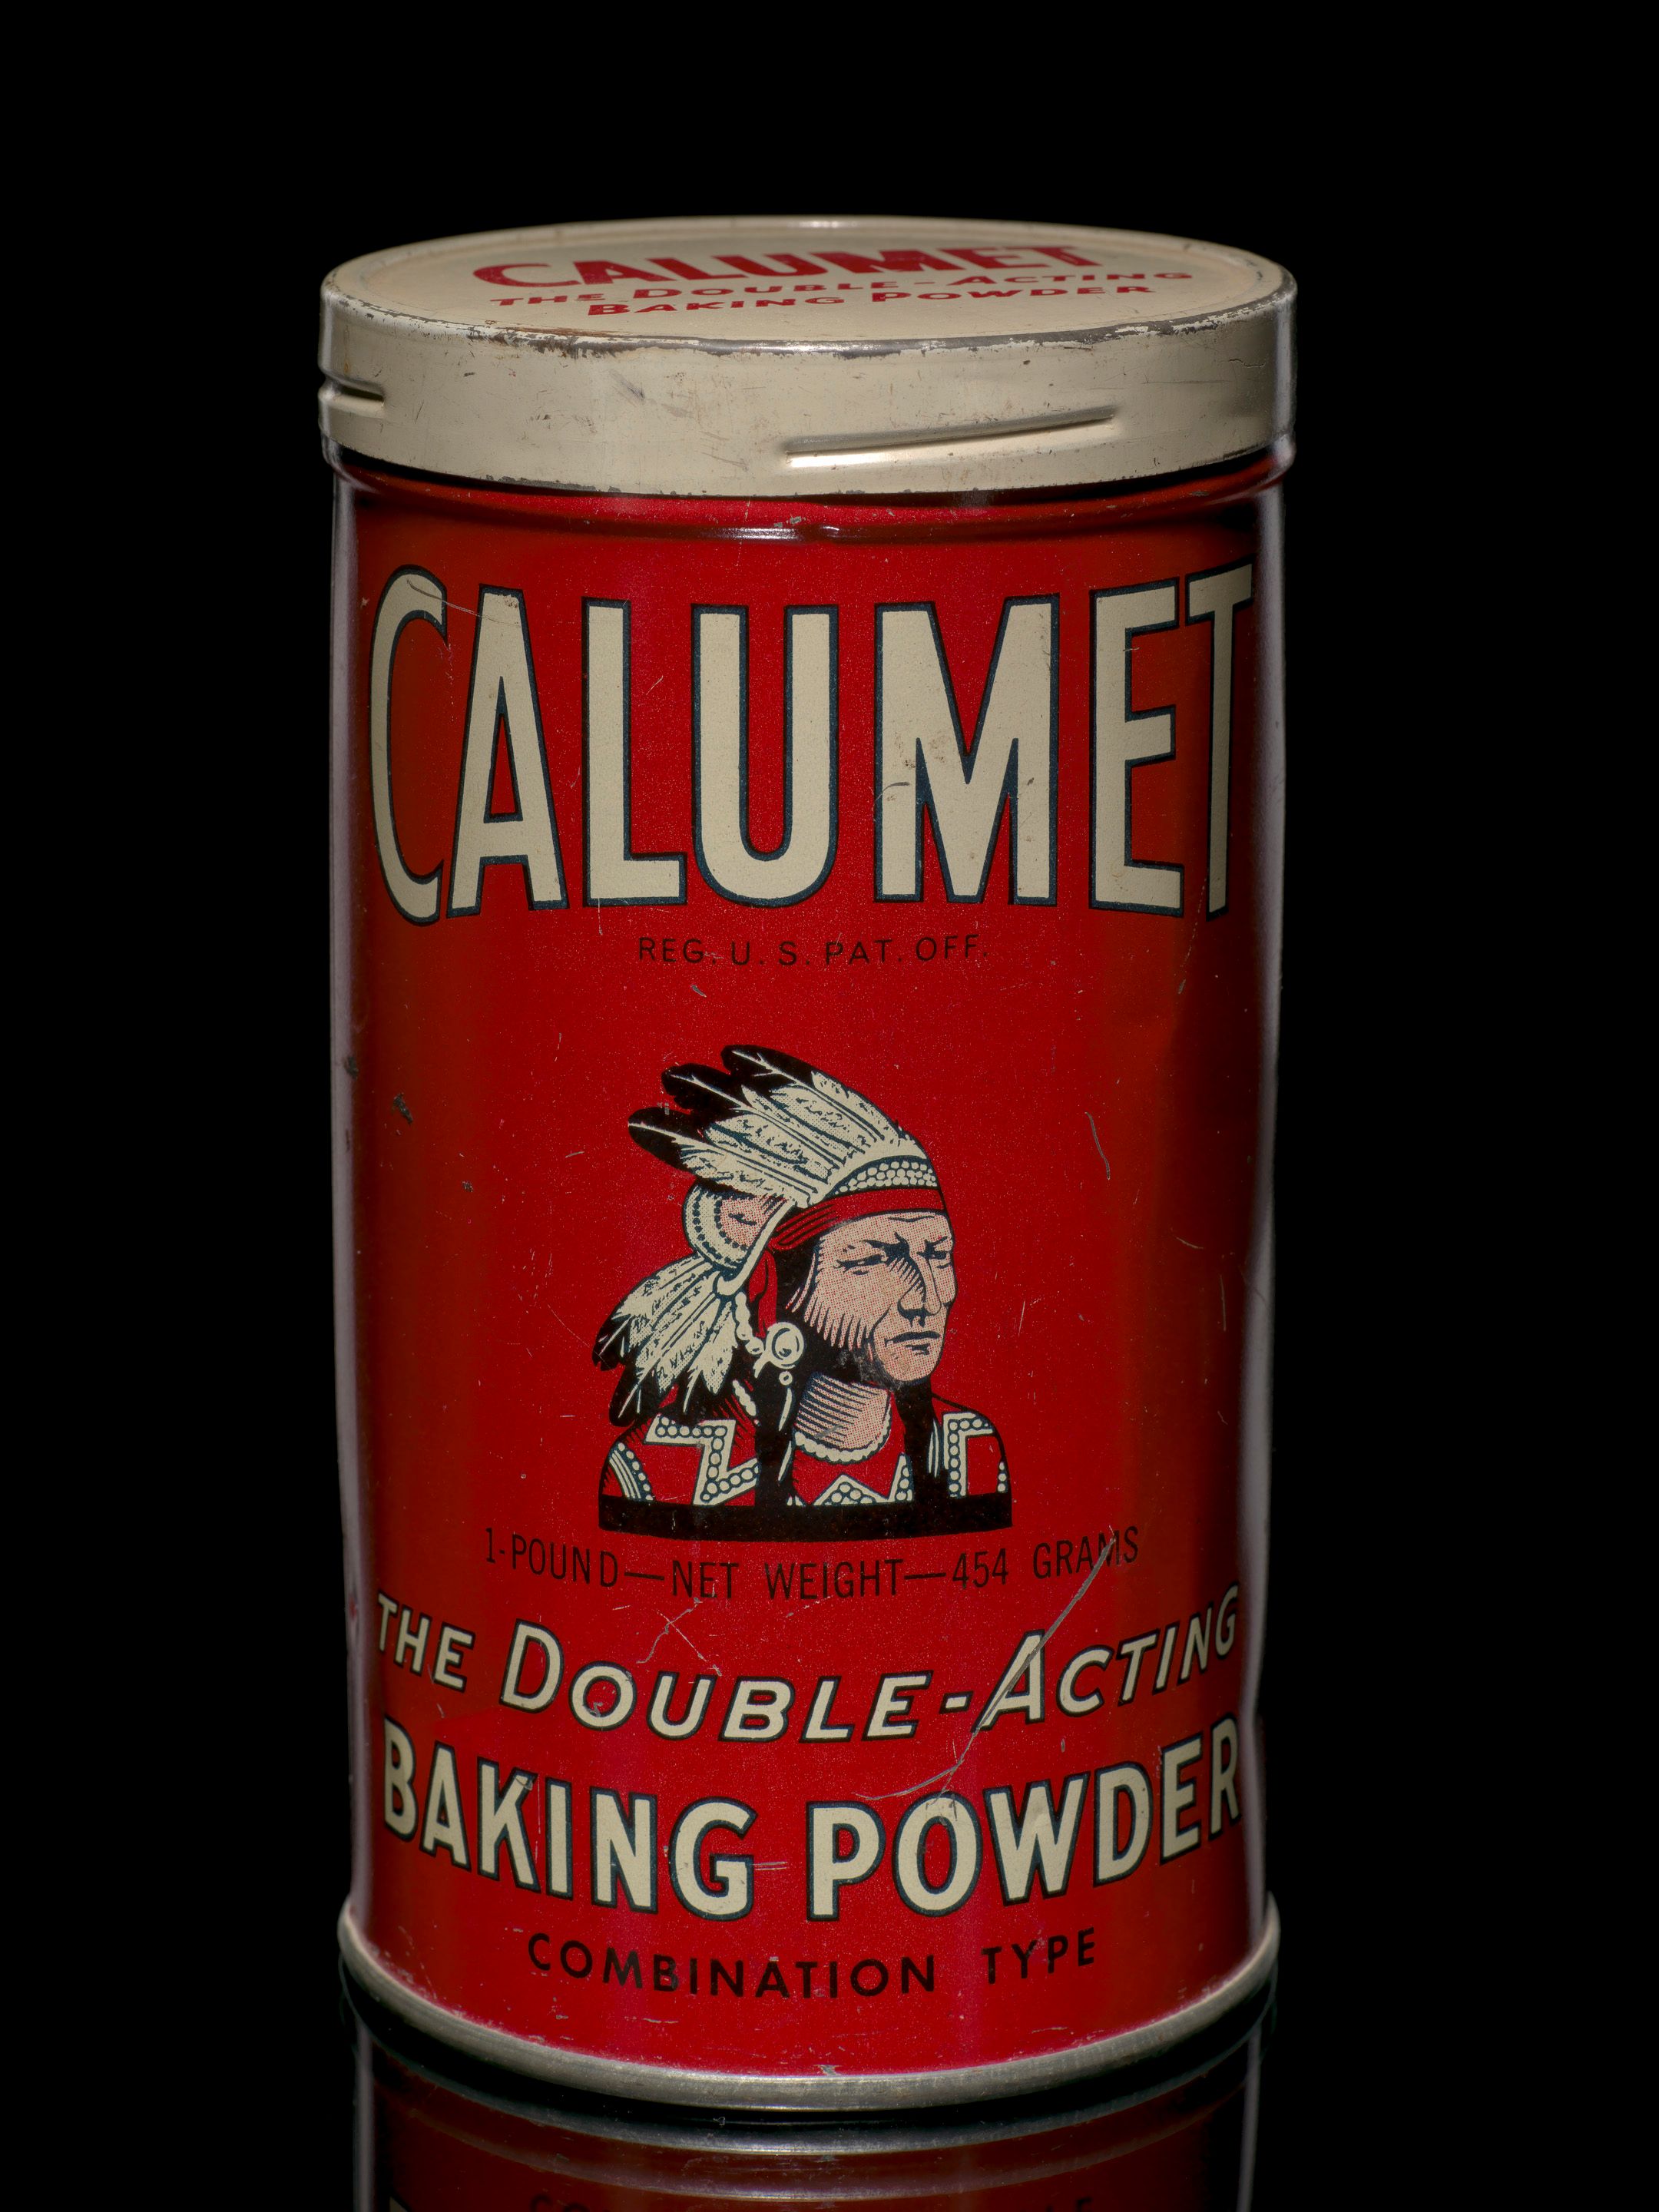 Calumet Baking Powder from National Museum of the American Indian